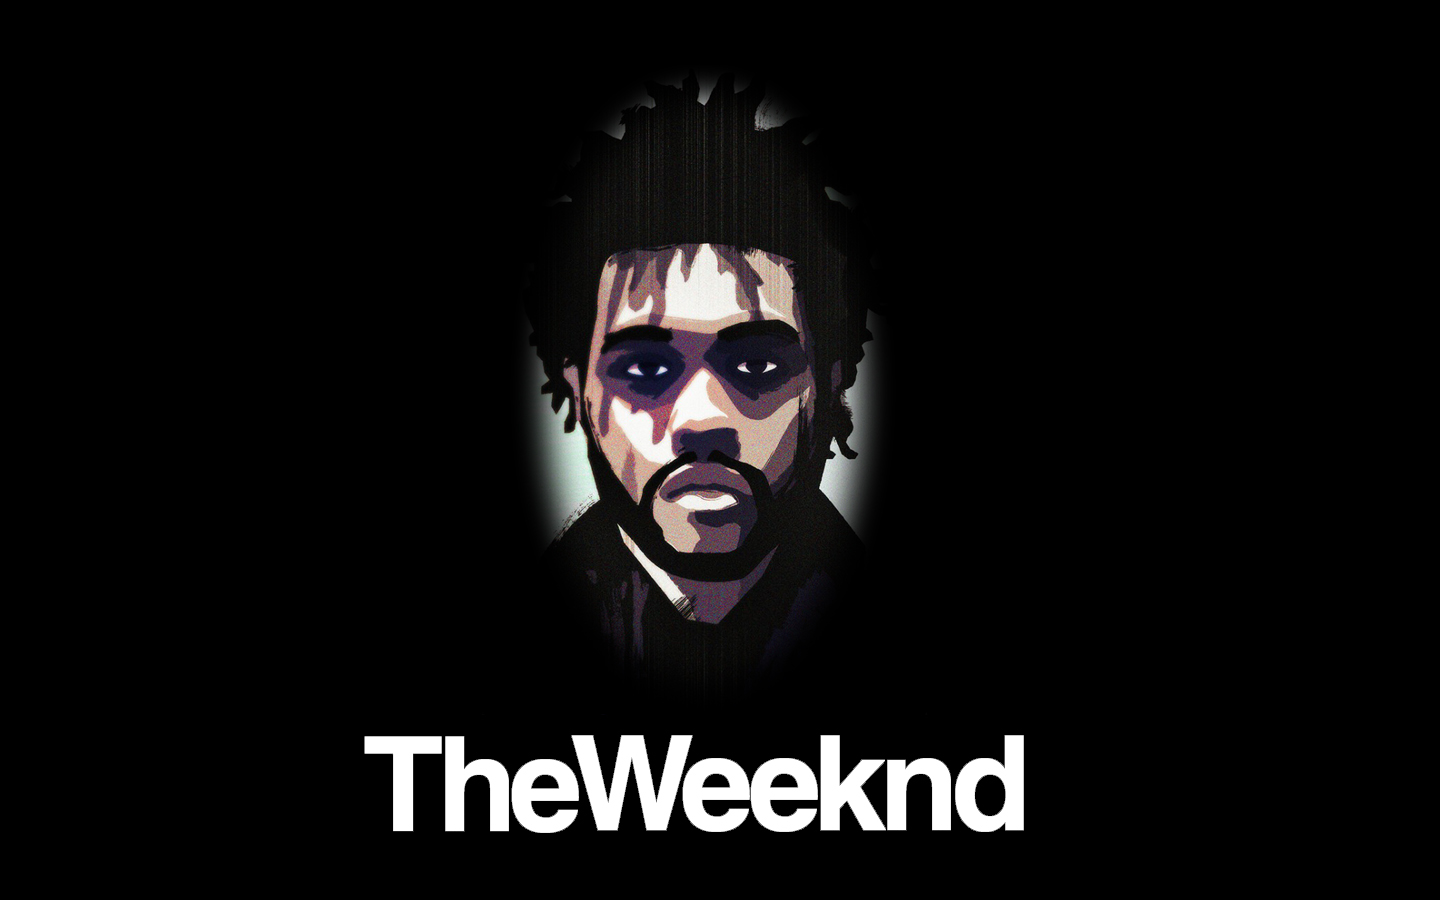  artist the weeknd please visit the weeknd 1 the weekend from humble